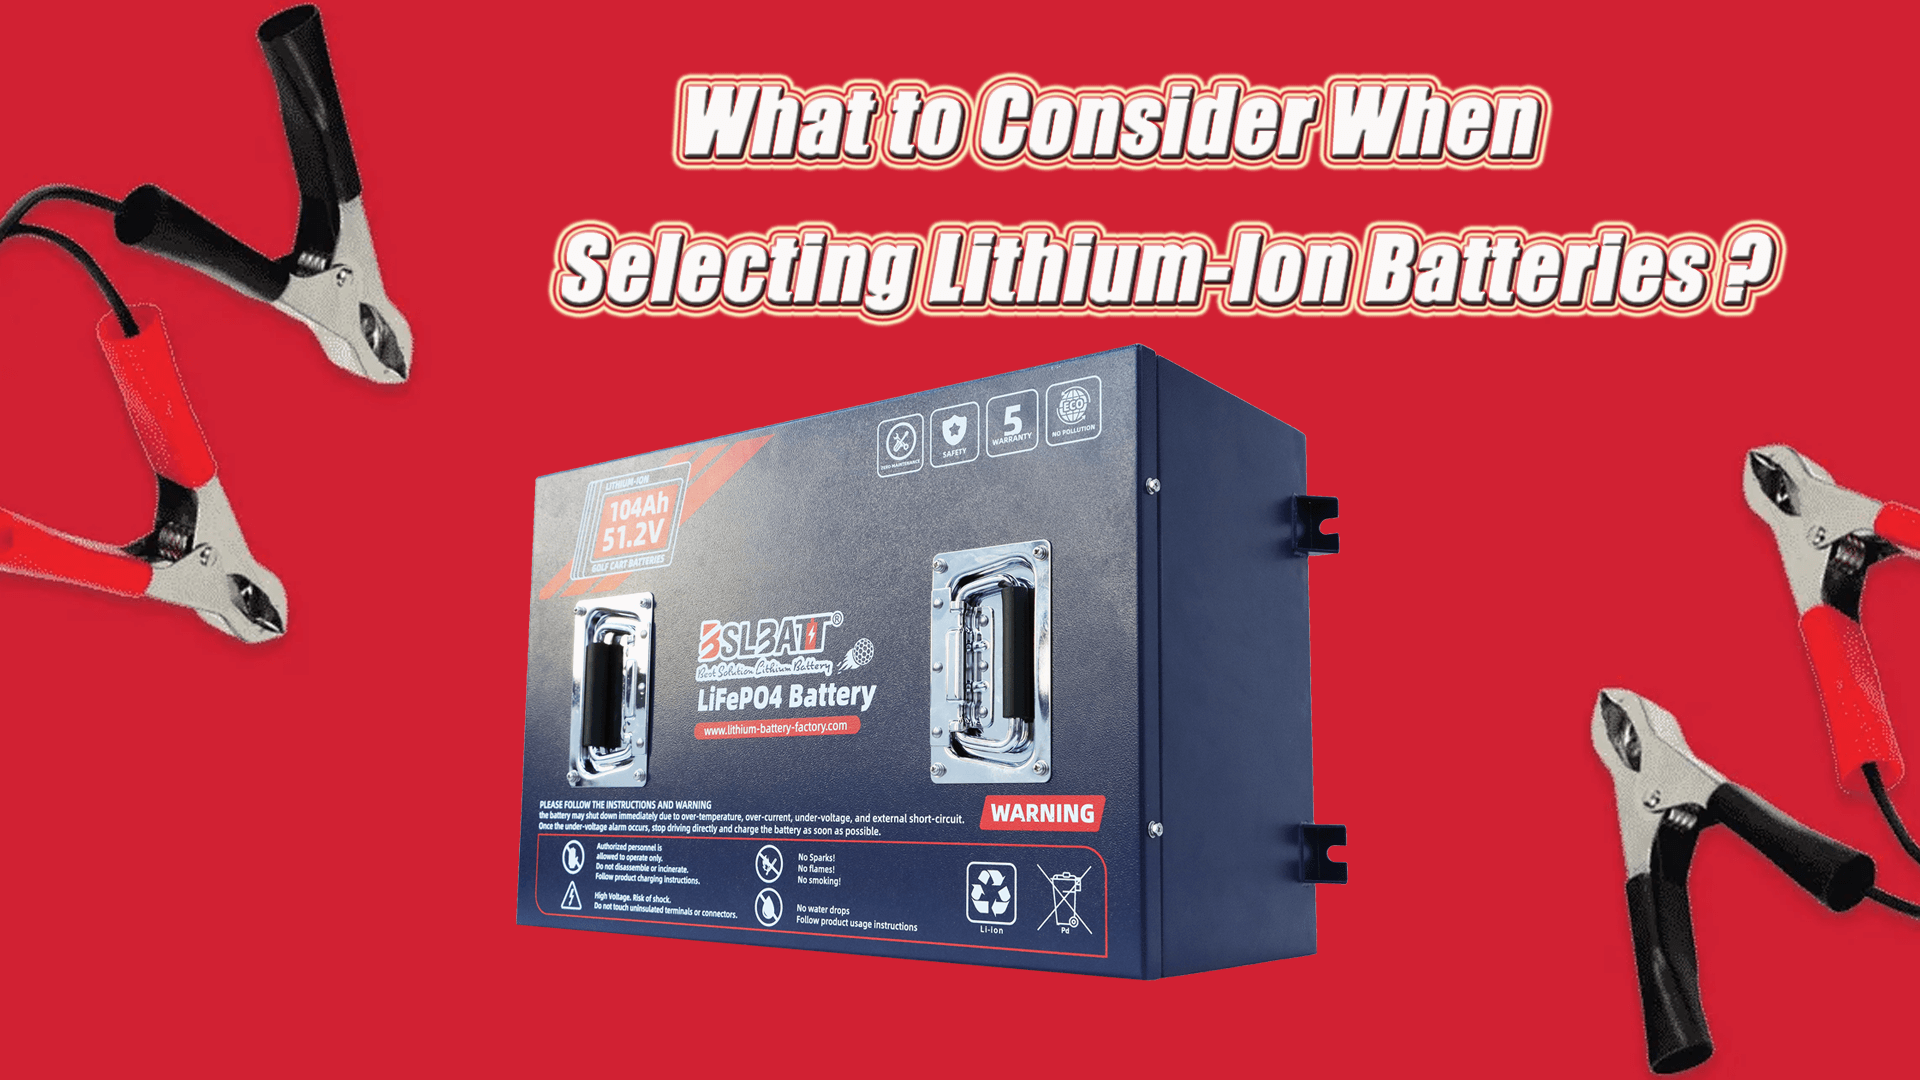 What to Consider When Selecting Lithium-Ion Batteries?